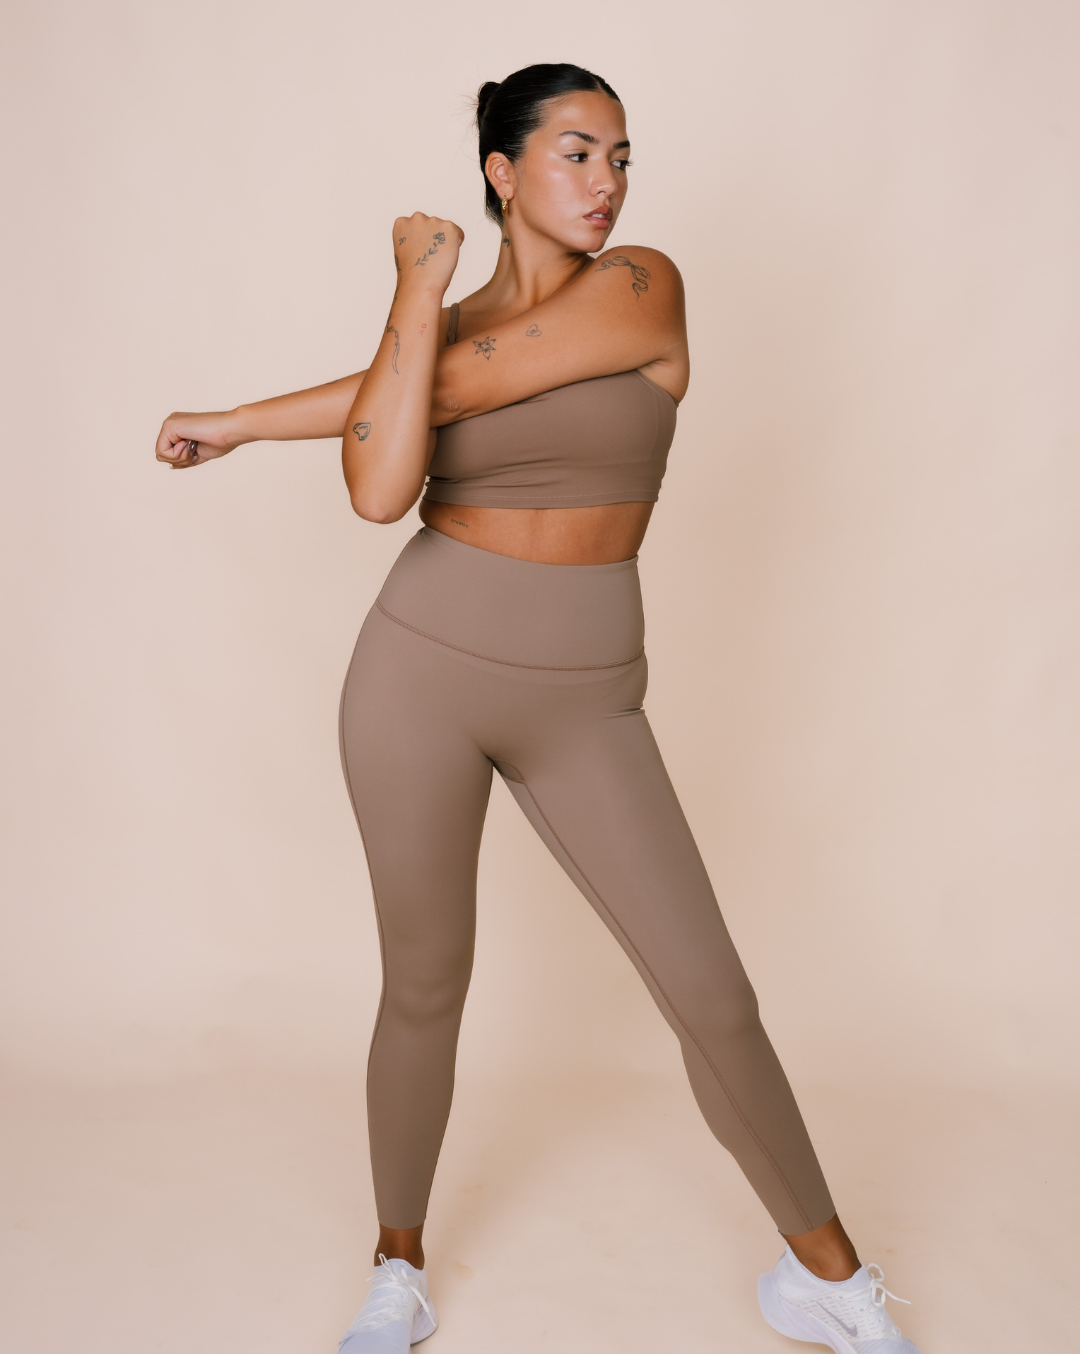 Form-fitting exercise wear in neutral color